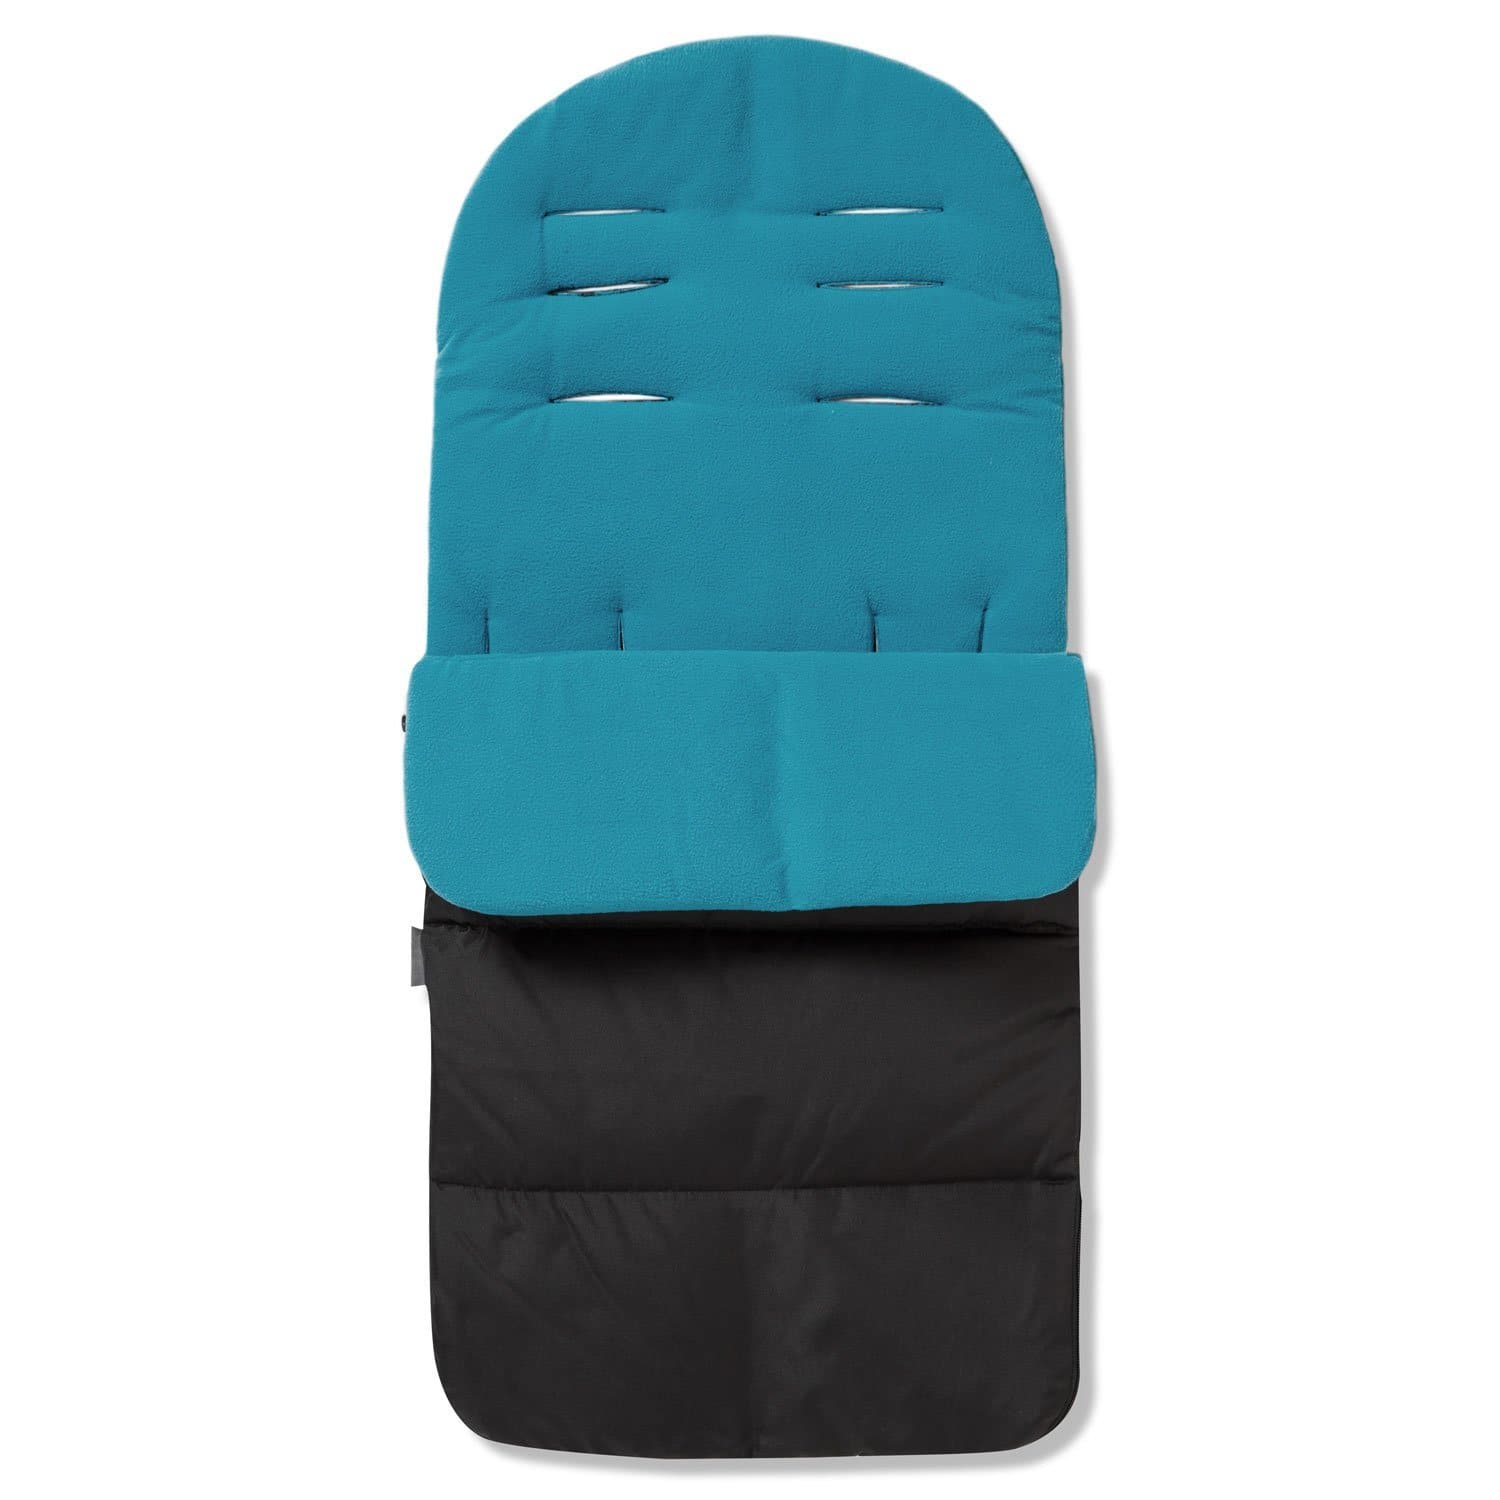 Premium Footmuff / Cosy Toes Compatible with Bloom - Ocean Blue / Fits All Models | For Your Little One